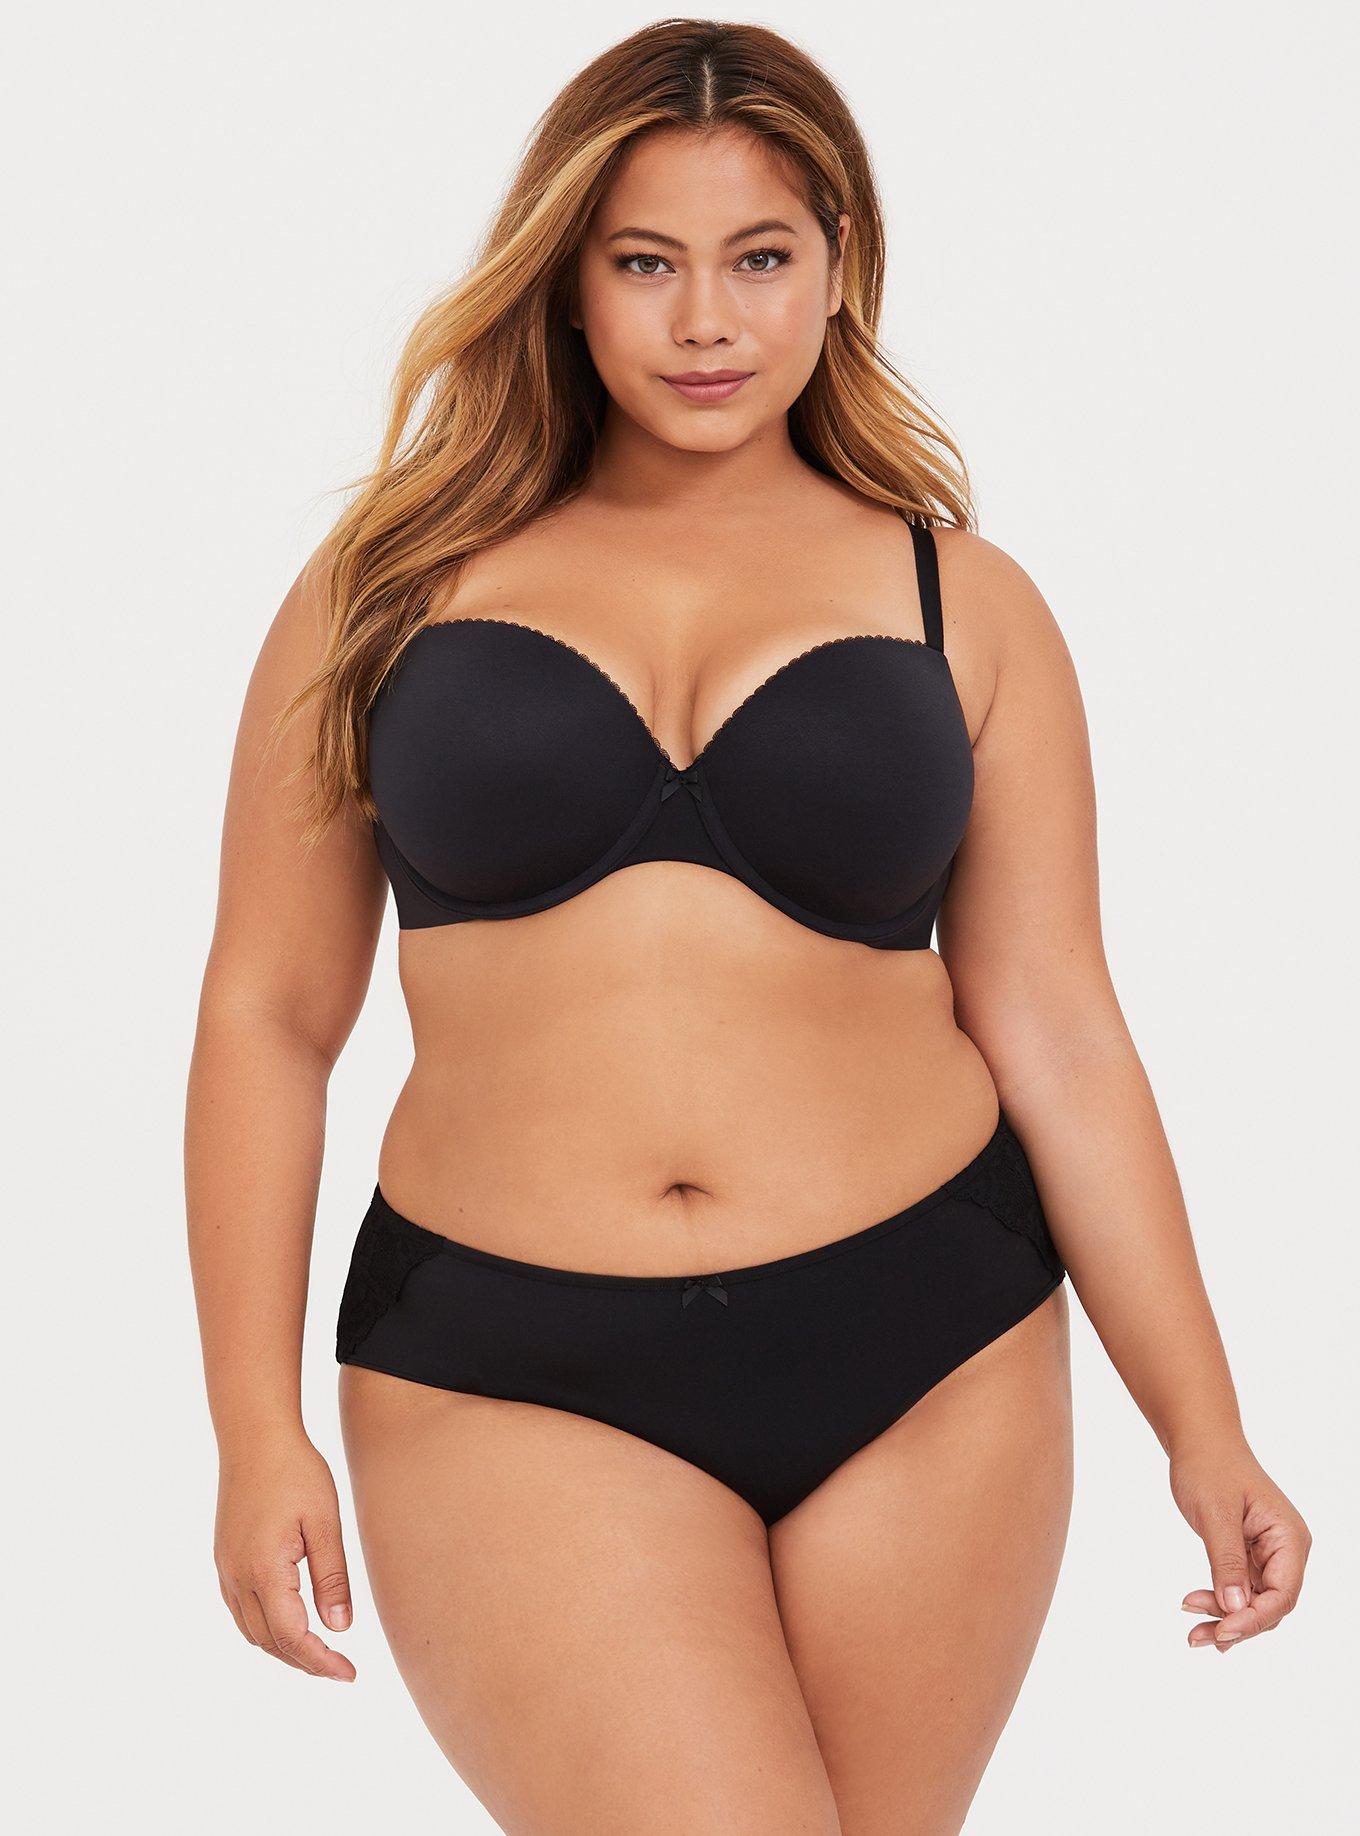 Torrid Curve black bra - 44G Size undefined - $25 - From Maria